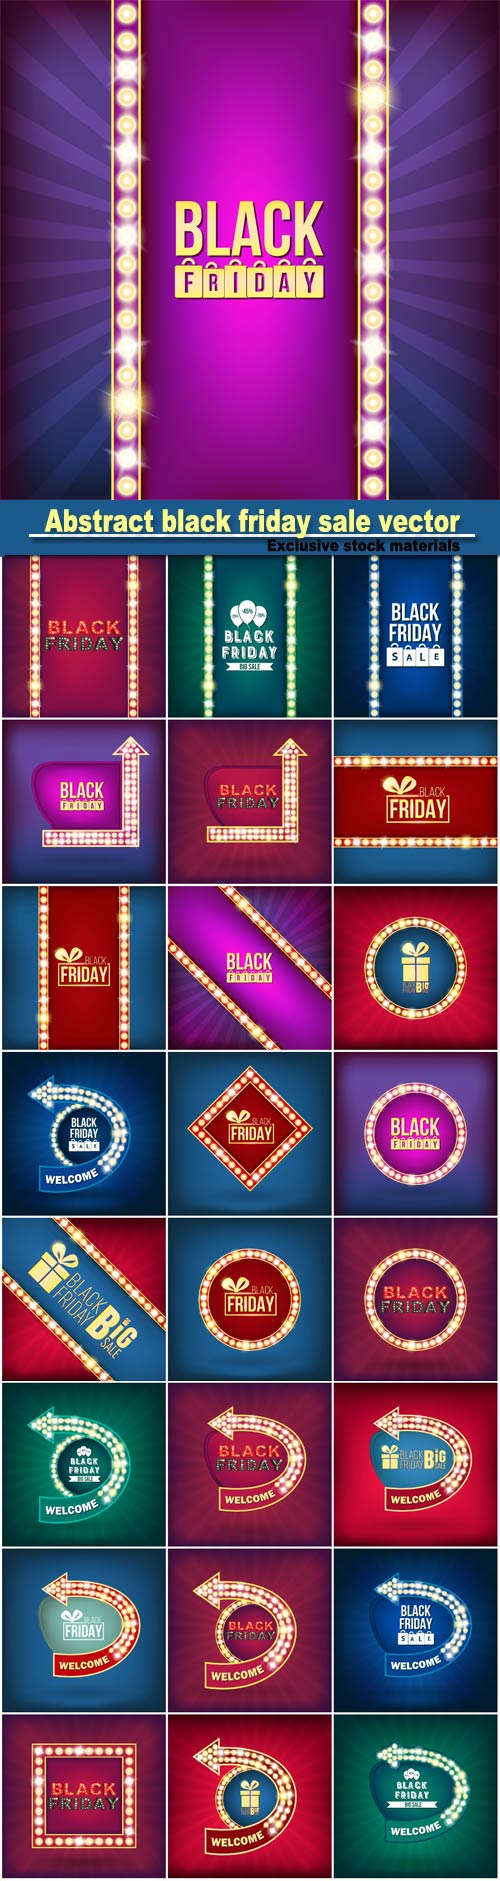 Abstract black friday sale vector background